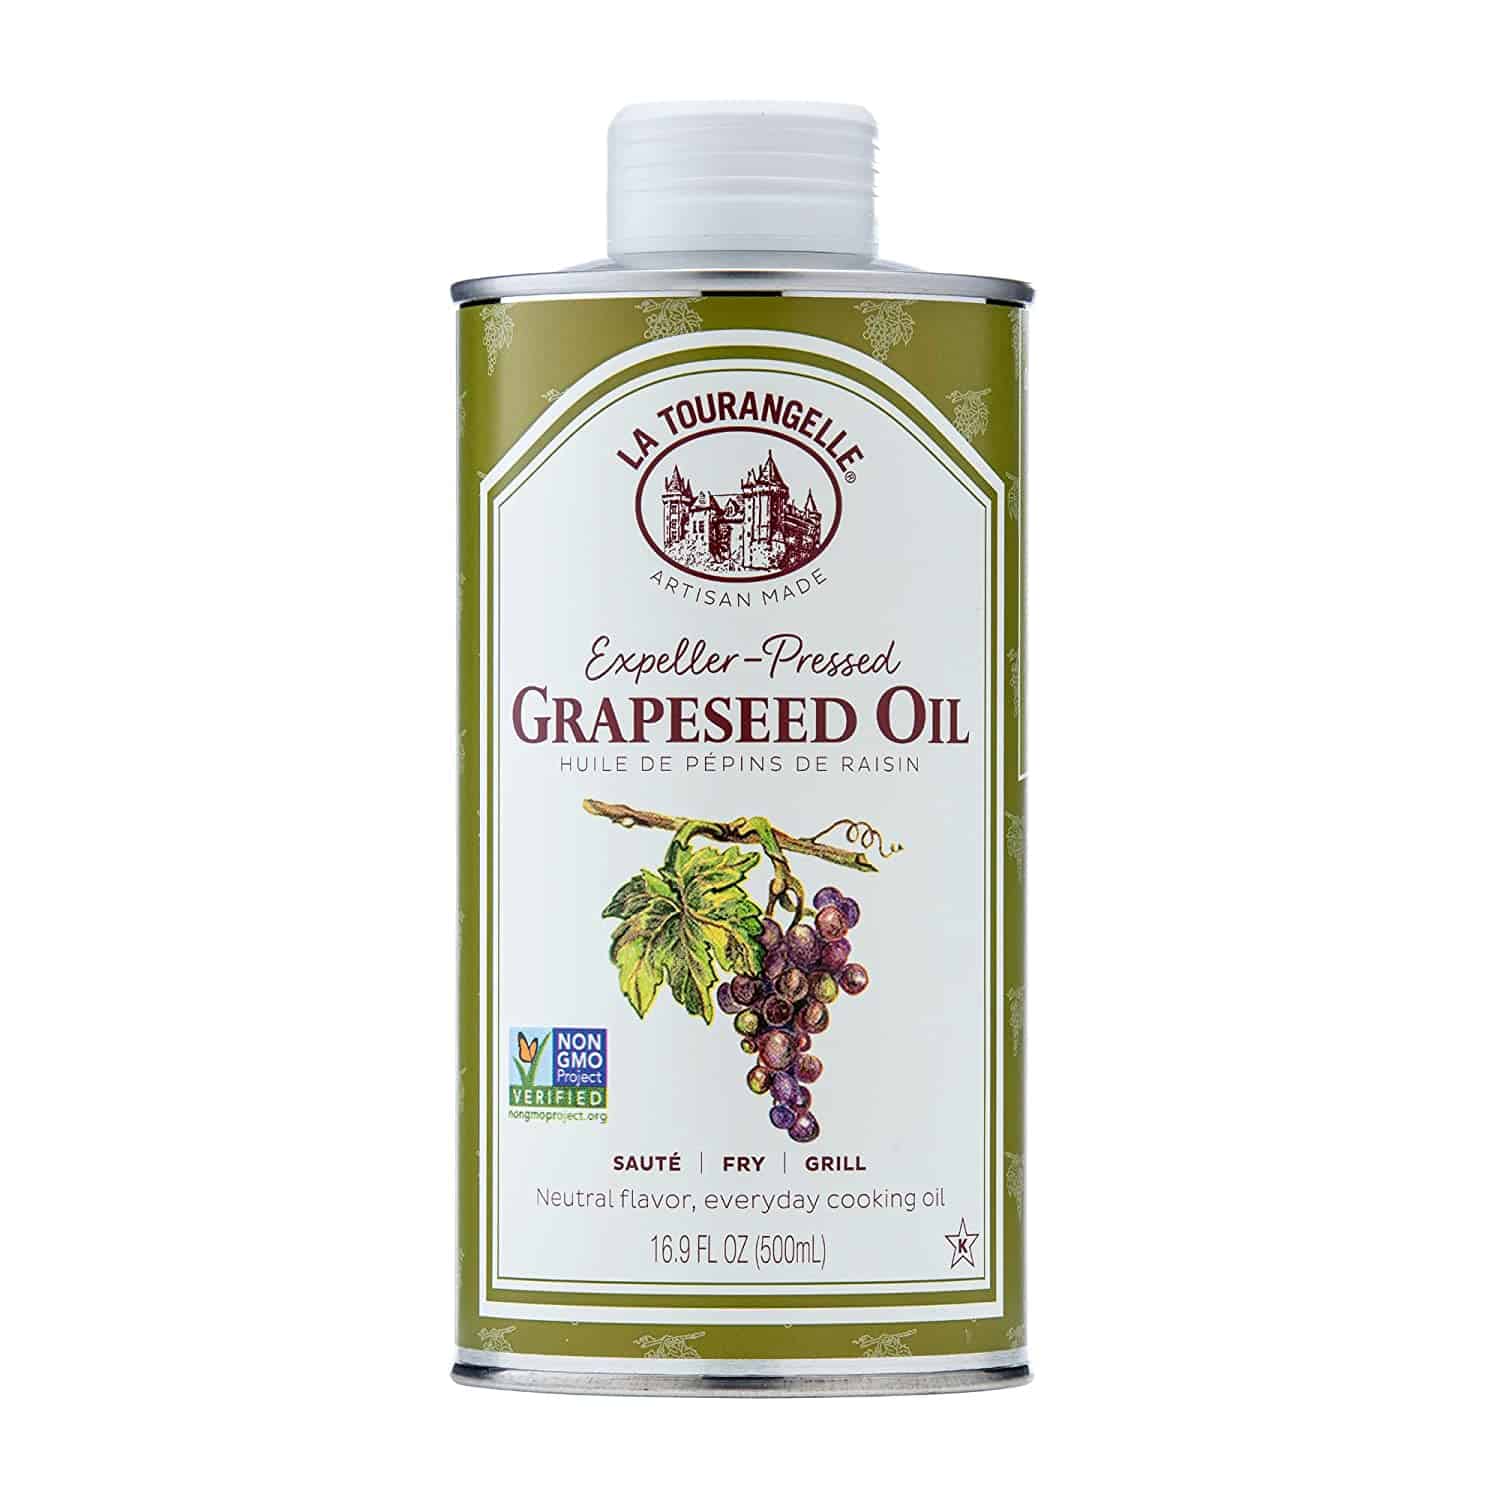 Good substitute for coconut oil is grapeseed oil